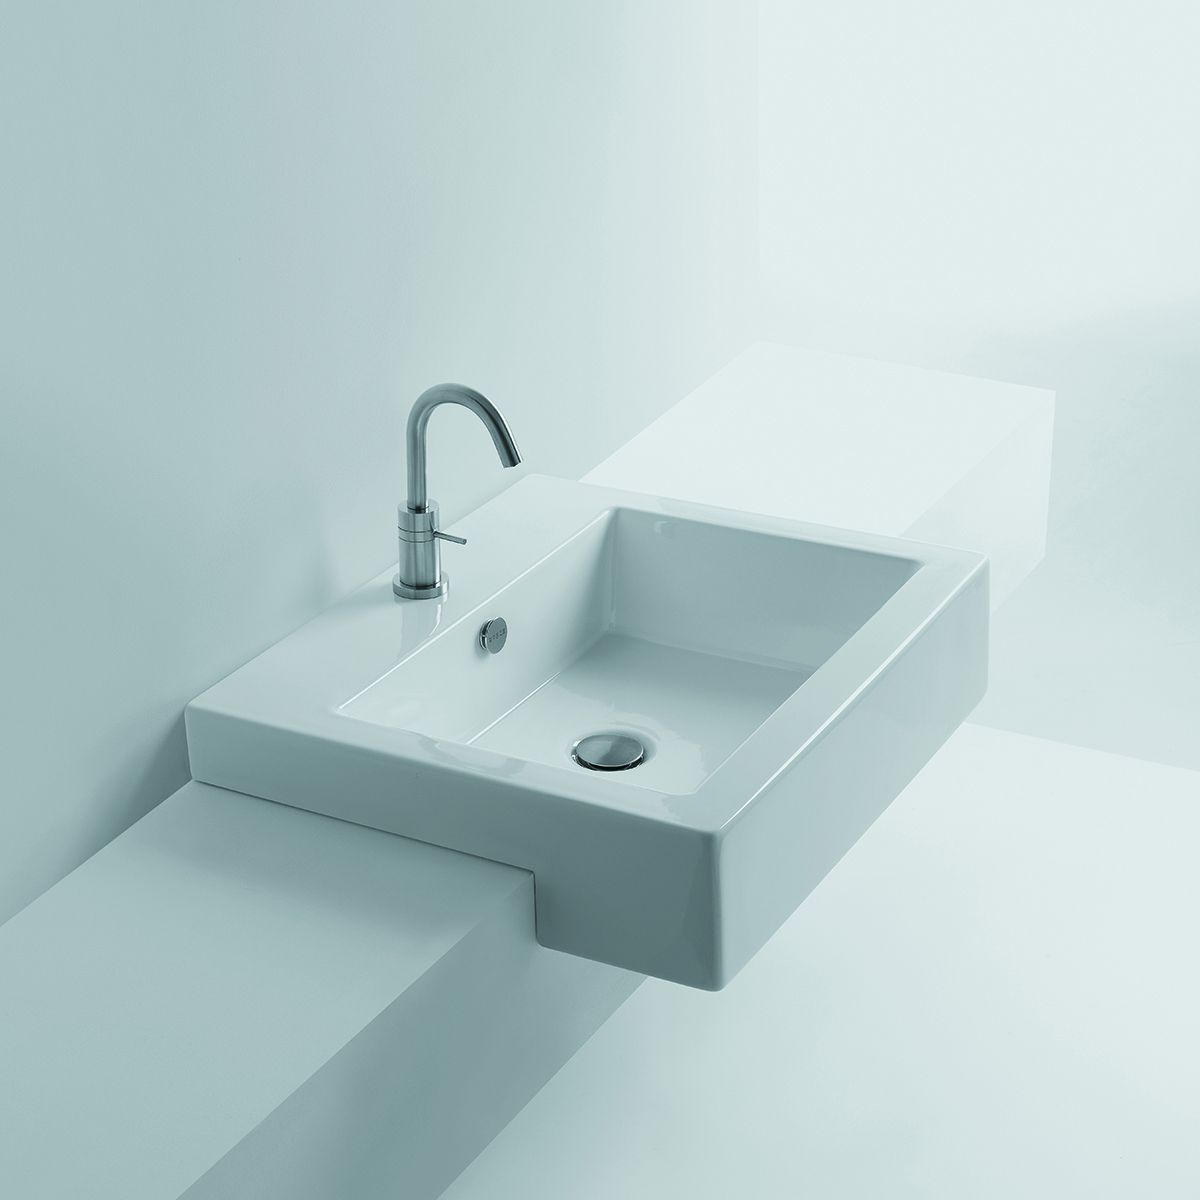 What is a Recessed Bathroom Sink? - Quad 61s